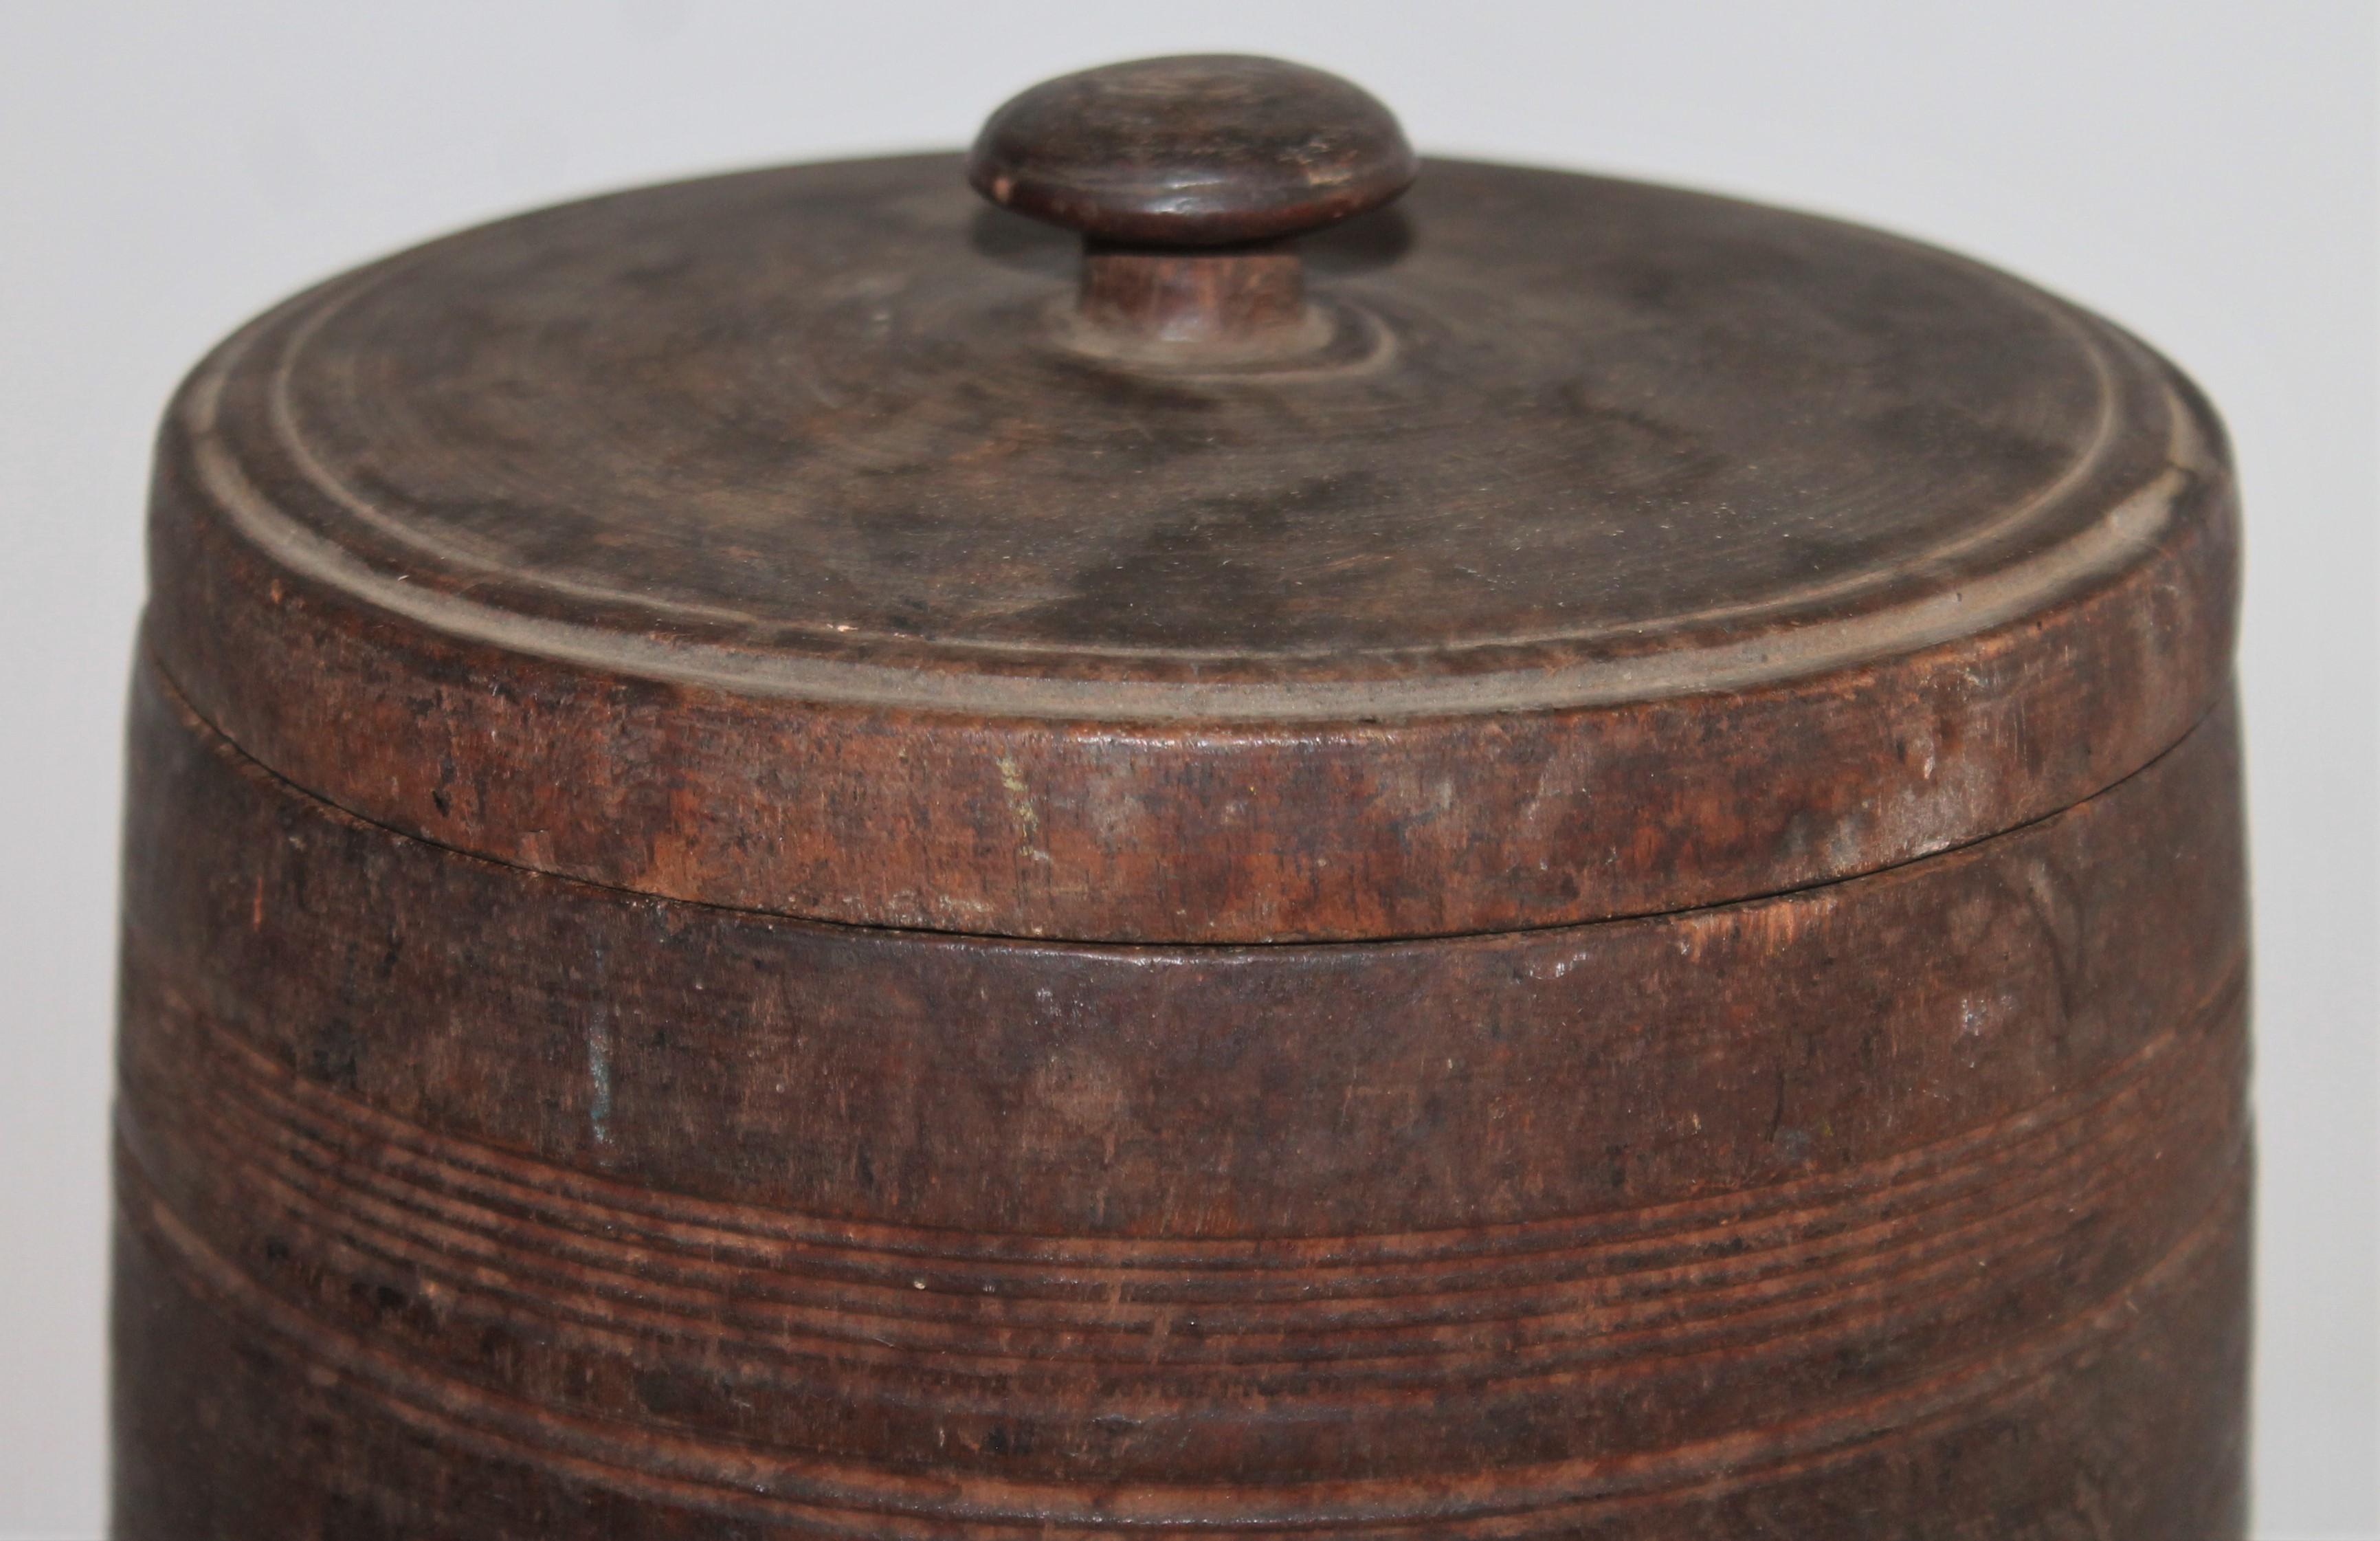 19th century handmade and carved wood canister from New England.